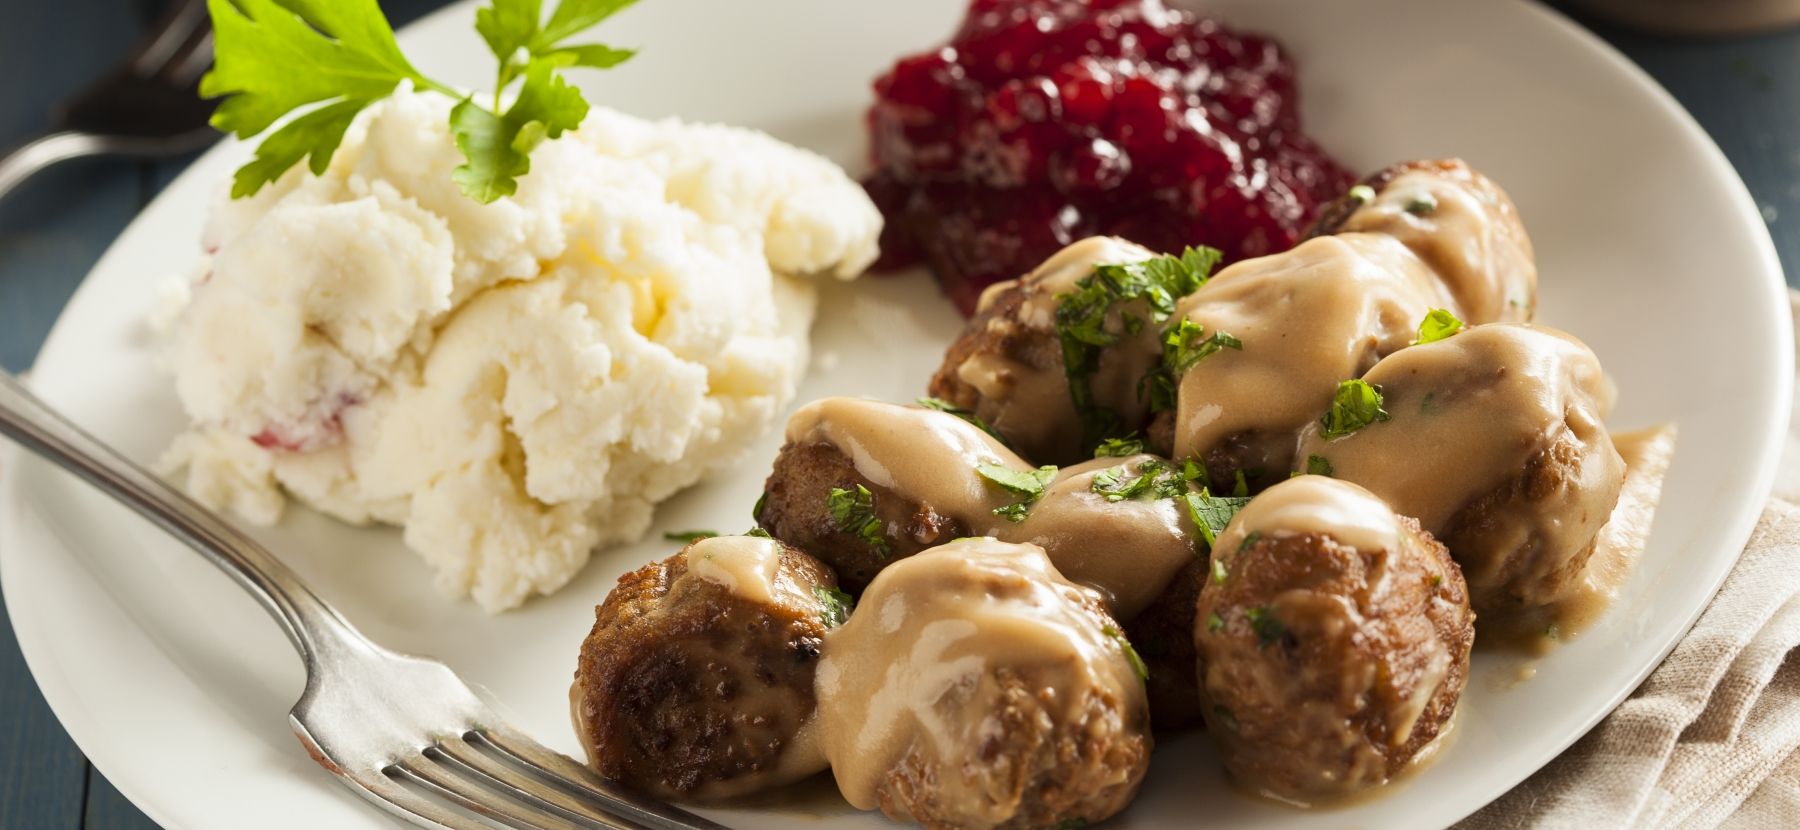 Photo of a dish of Swedish meatballs, covered with brown cream sauce, with a side of mashed potatoes and jam